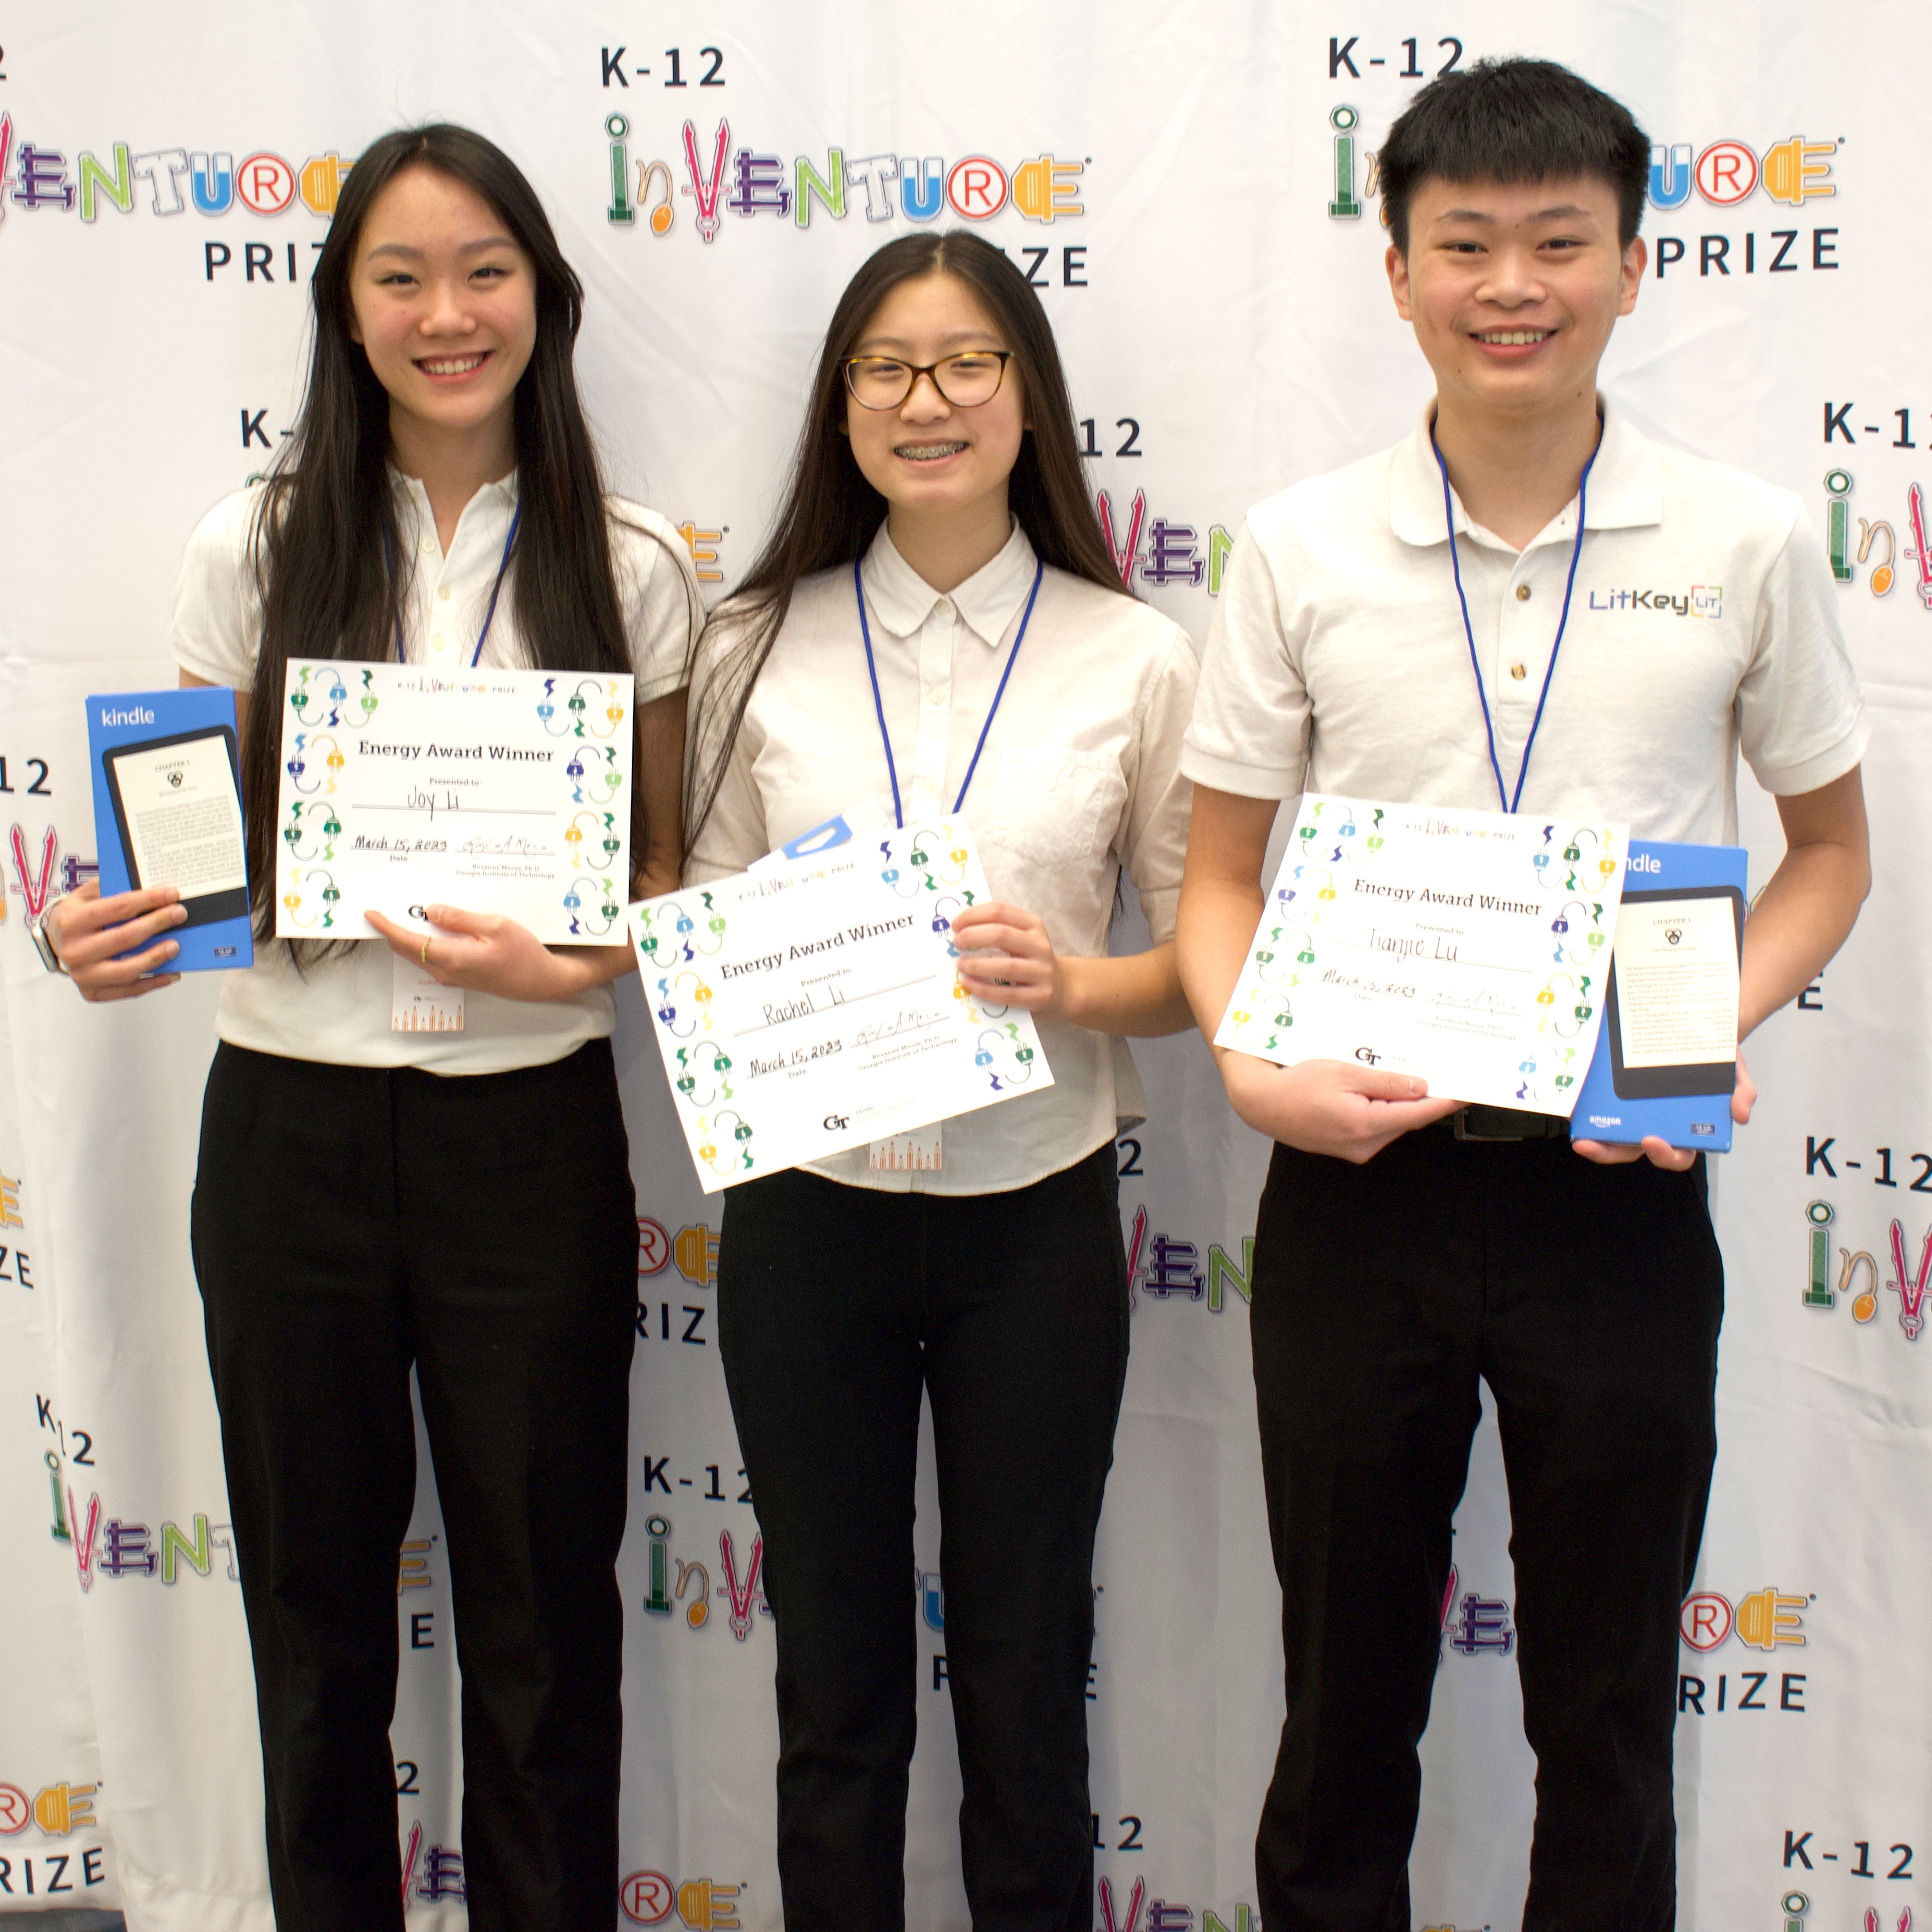 Three smiling students holding certificates and prizes (Kindles)